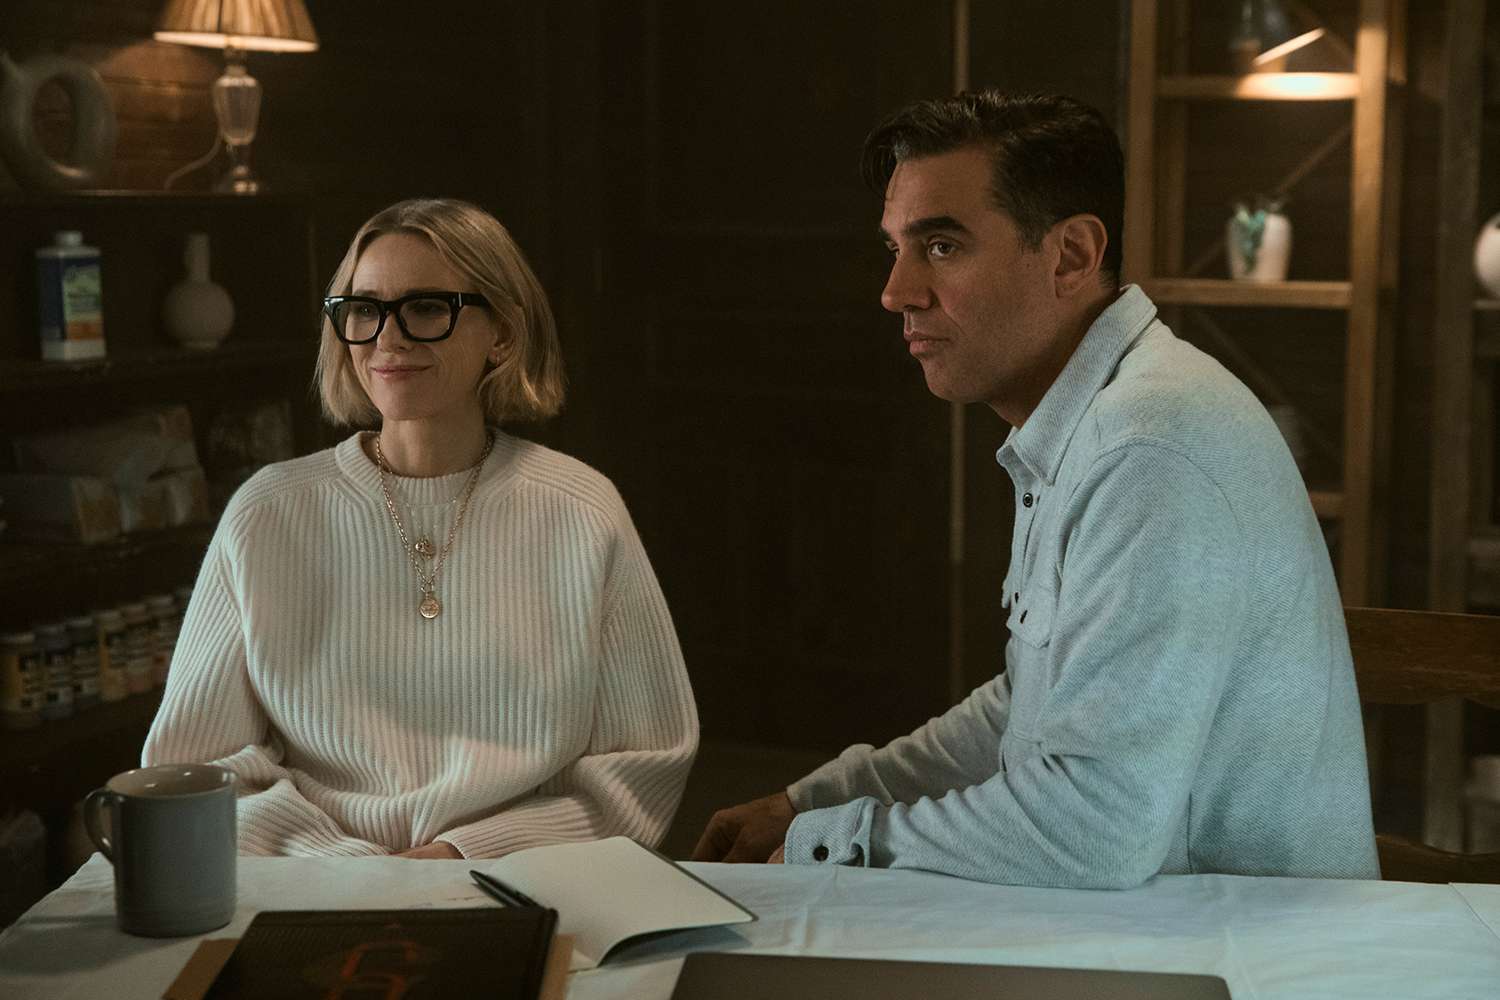 The Watcher. (L to R) Naomi Watts as Nora Brannock, Bobby Cannavale as Dean Brannock in episode 106 of The Watcher.